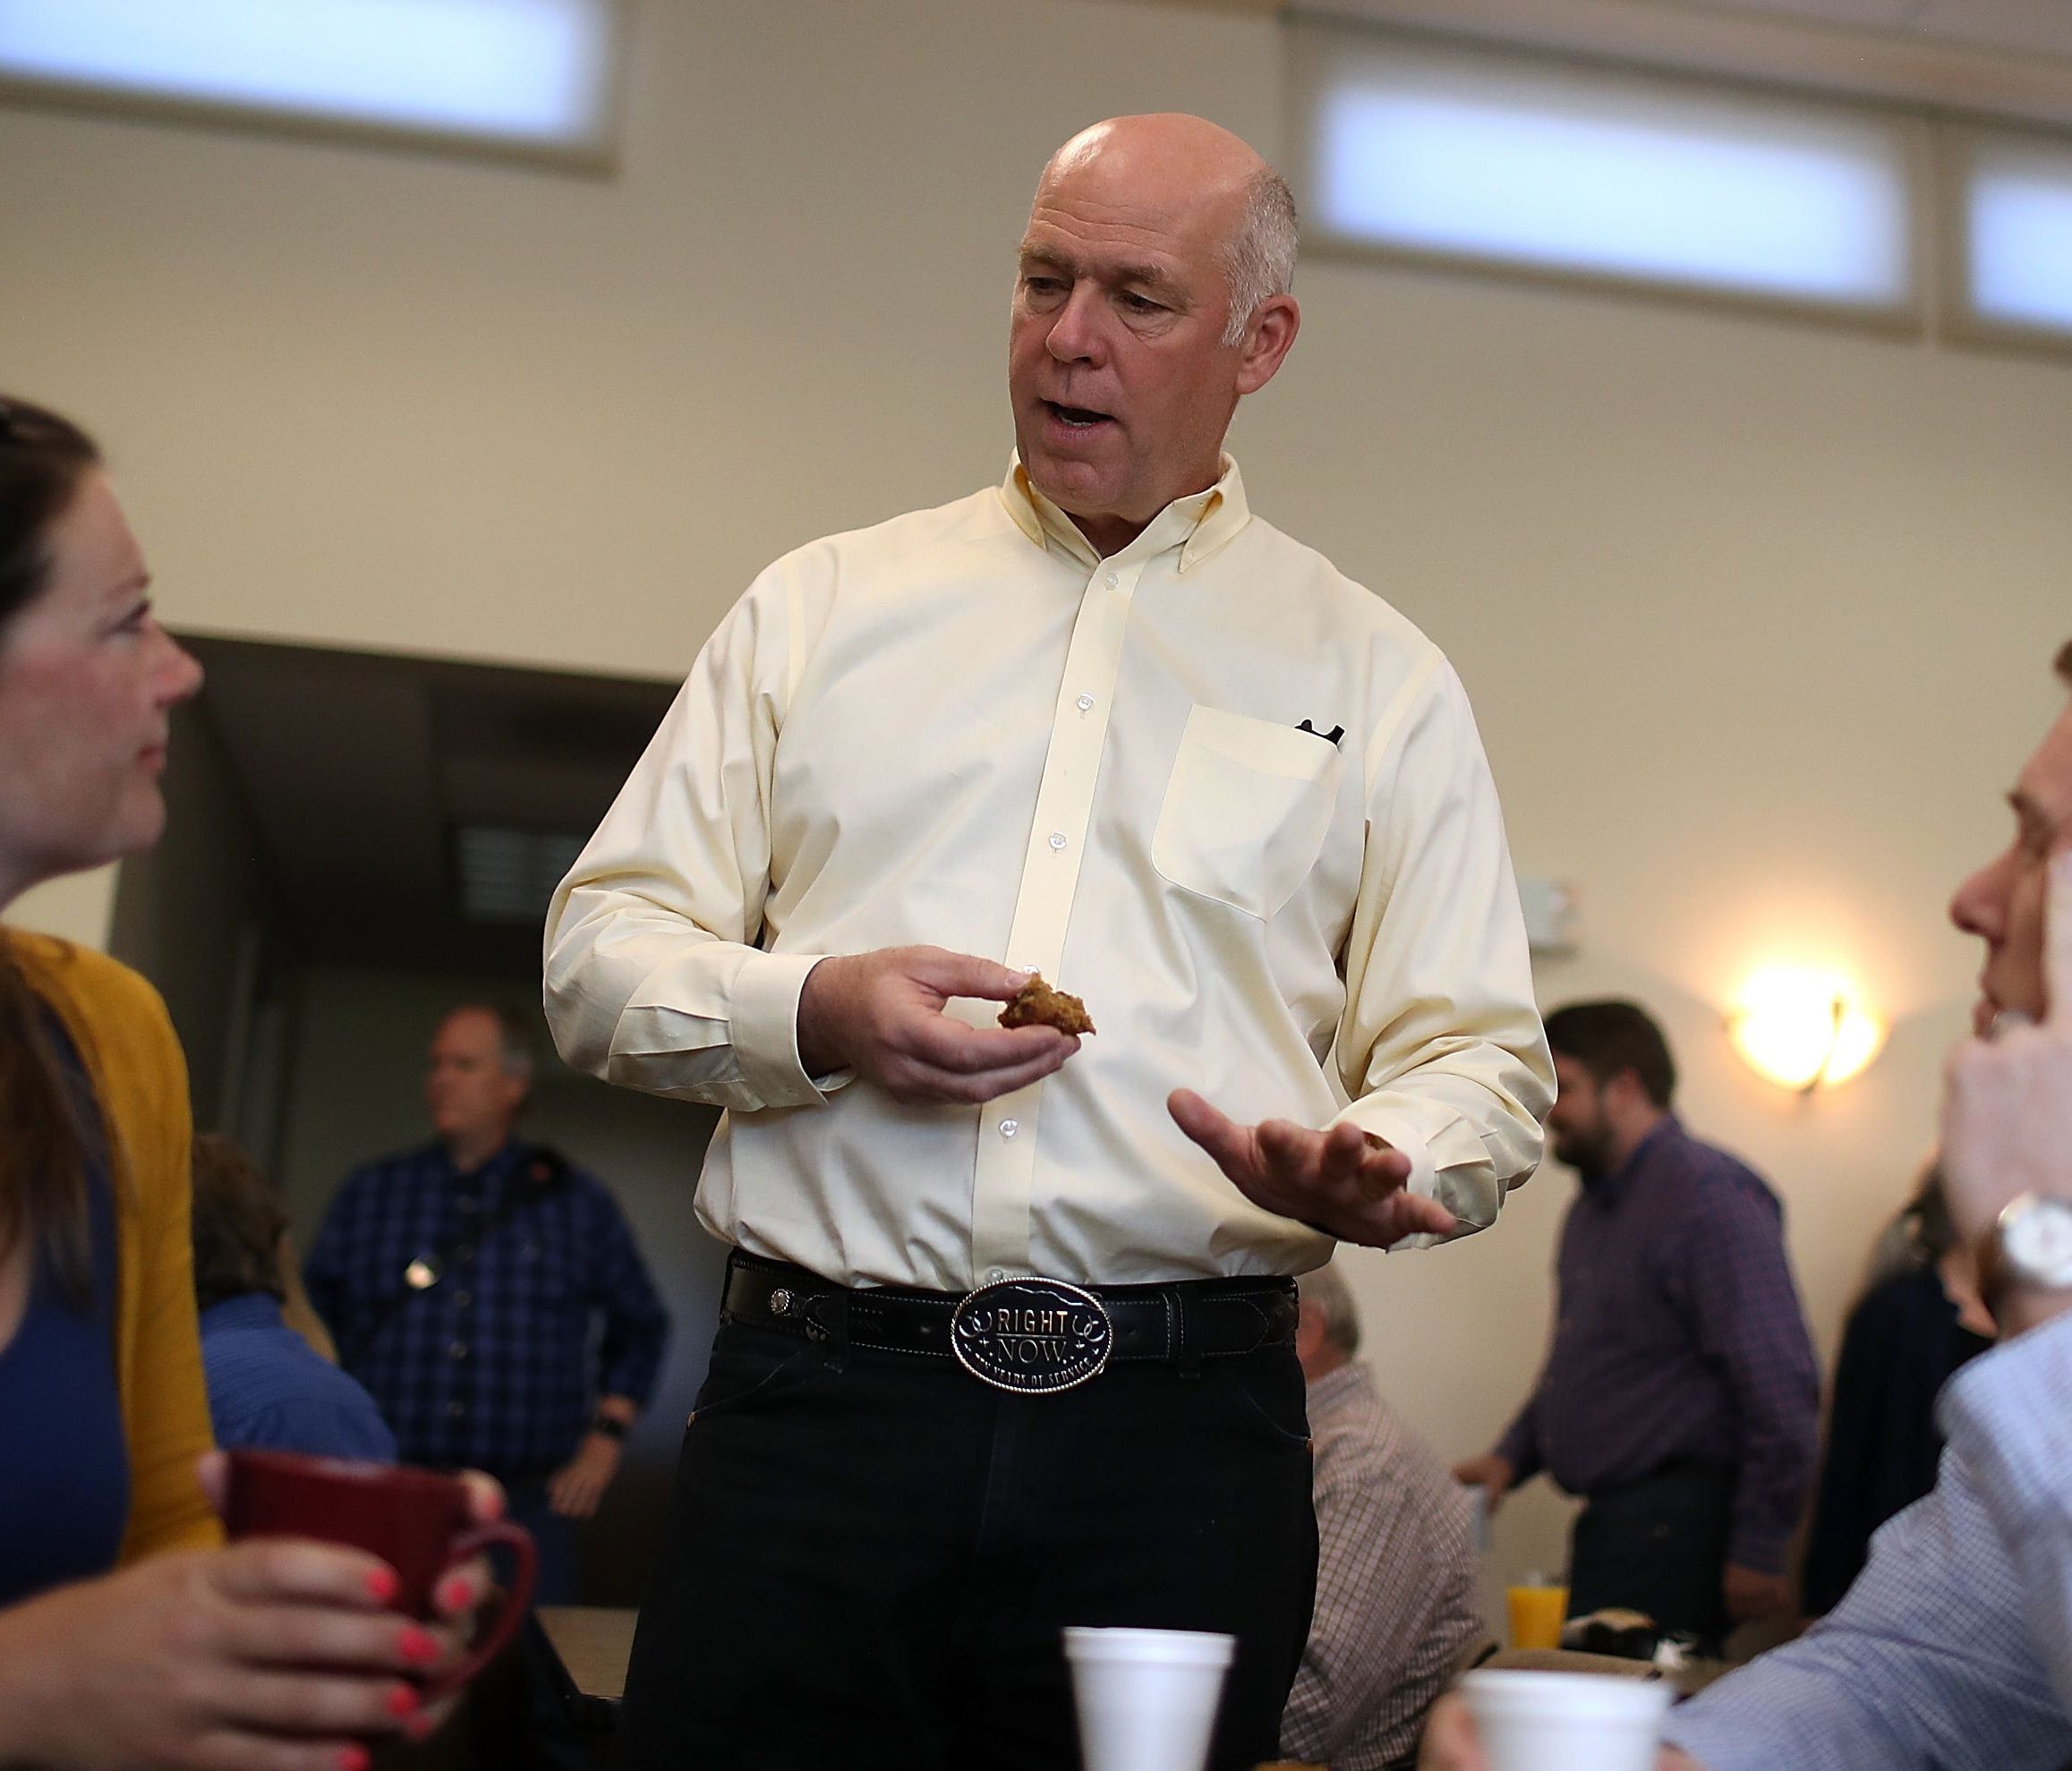 Republican congressional candidate Greg Gianforte is pictured talking with supporters during a campaign meet and greet.